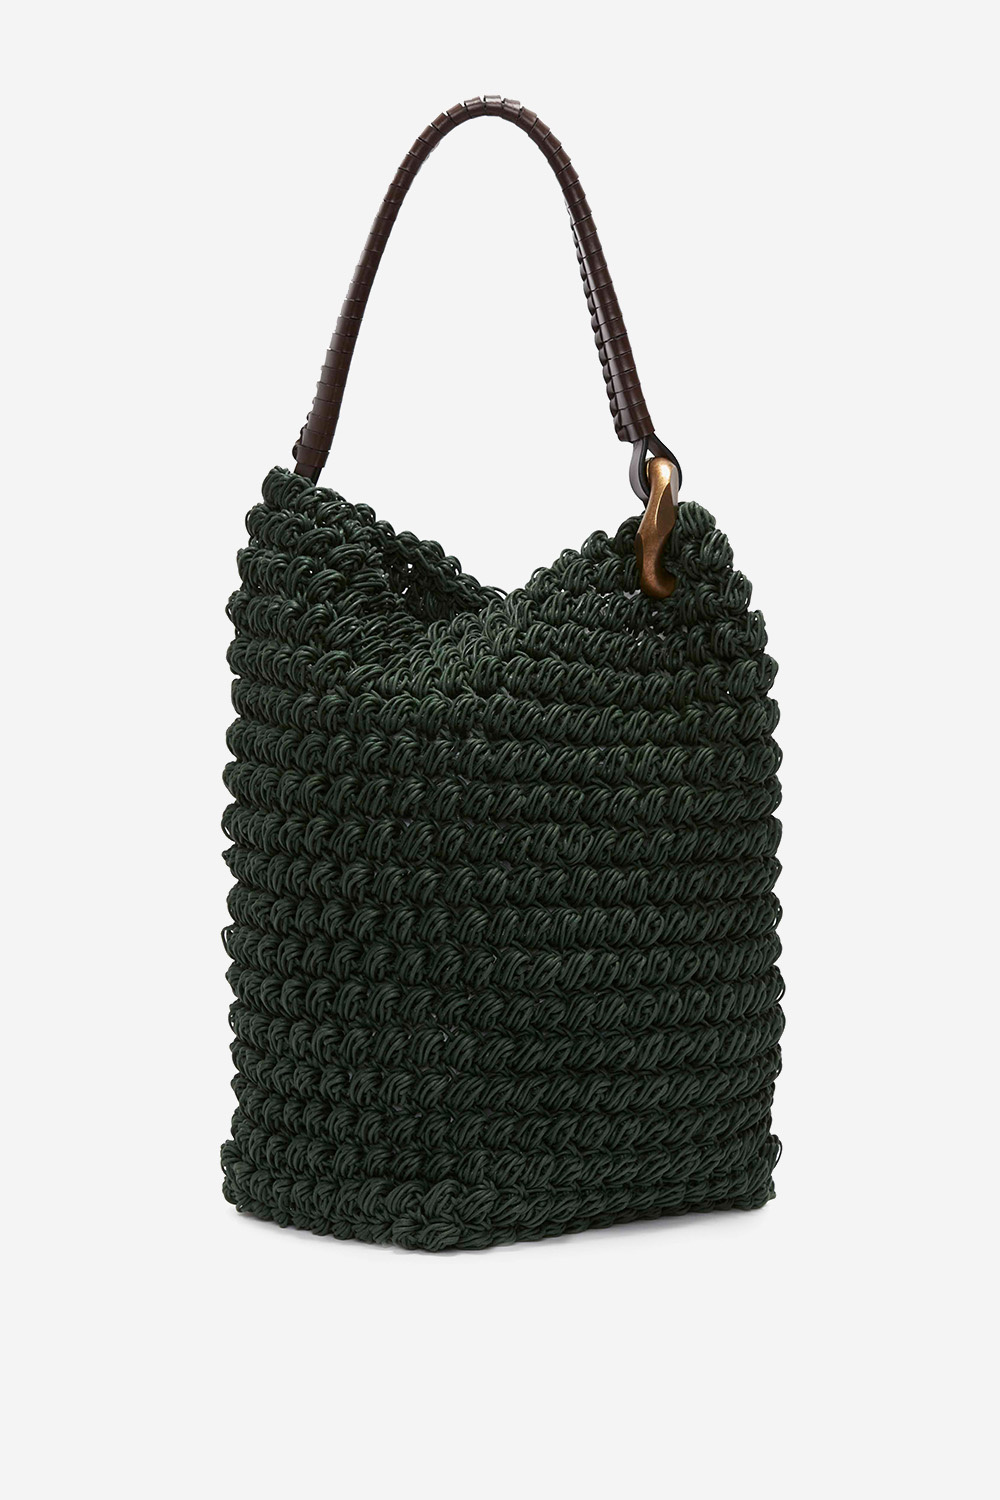 JW Anderson Tote bag Green